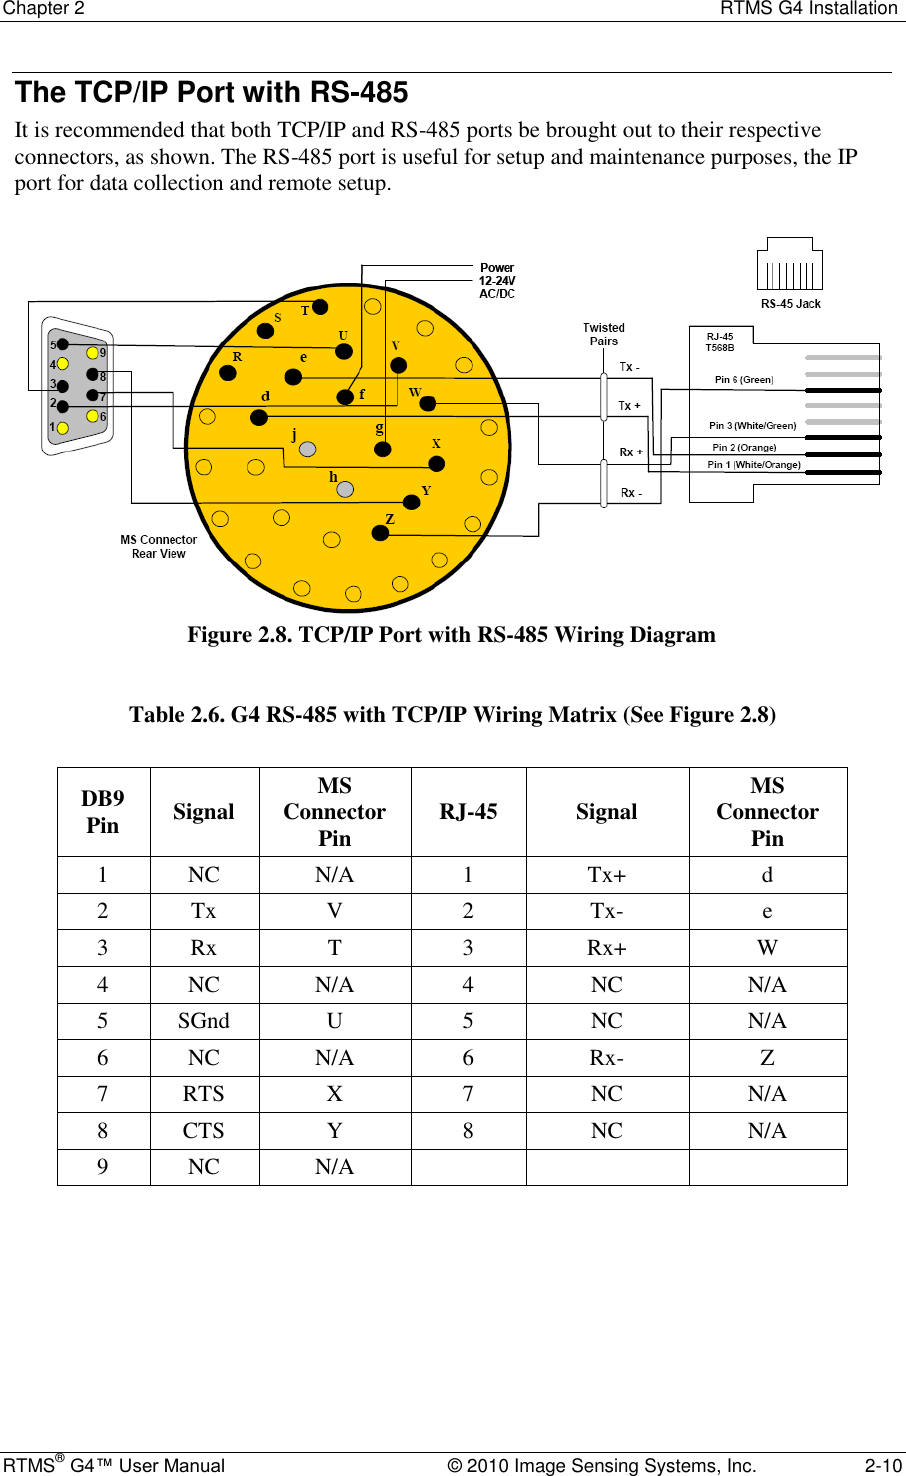 Chapter 2  RTMS G4 Installation RTMS® G4™ User Manual  © 2010 Image Sensing Systems, Inc.  2-10 The TCP/IP Port with RS-485 It is recommended that both TCP/IP and RS-485 ports be brought out to their respective connectors, as shown. The RS-485 port is useful for setup and maintenance purposes, the IP port for data collection and remote setup.   Figure 2.8. TCP/IP Port with RS-485 Wiring Diagram  Table 2.6. G4 RS-485 with TCP/IP Wiring Matrix (See Figure 2.8)  DB9 Pin Signal MS Connector Pin RJ-45 Signal MS Connector Pin 1 NC N/A 1 Tx+ d 2 Tx V 2 Tx- e 3 Rx T 3 Rx+ W 4 NC N/A 4 NC N/A 5 SGnd U 5 NC N/A 6 NC N/A 6 Rx- Z 7 RTS X 7 NC N/A 8 CTS Y 8 NC N/A 9 NC N/A      